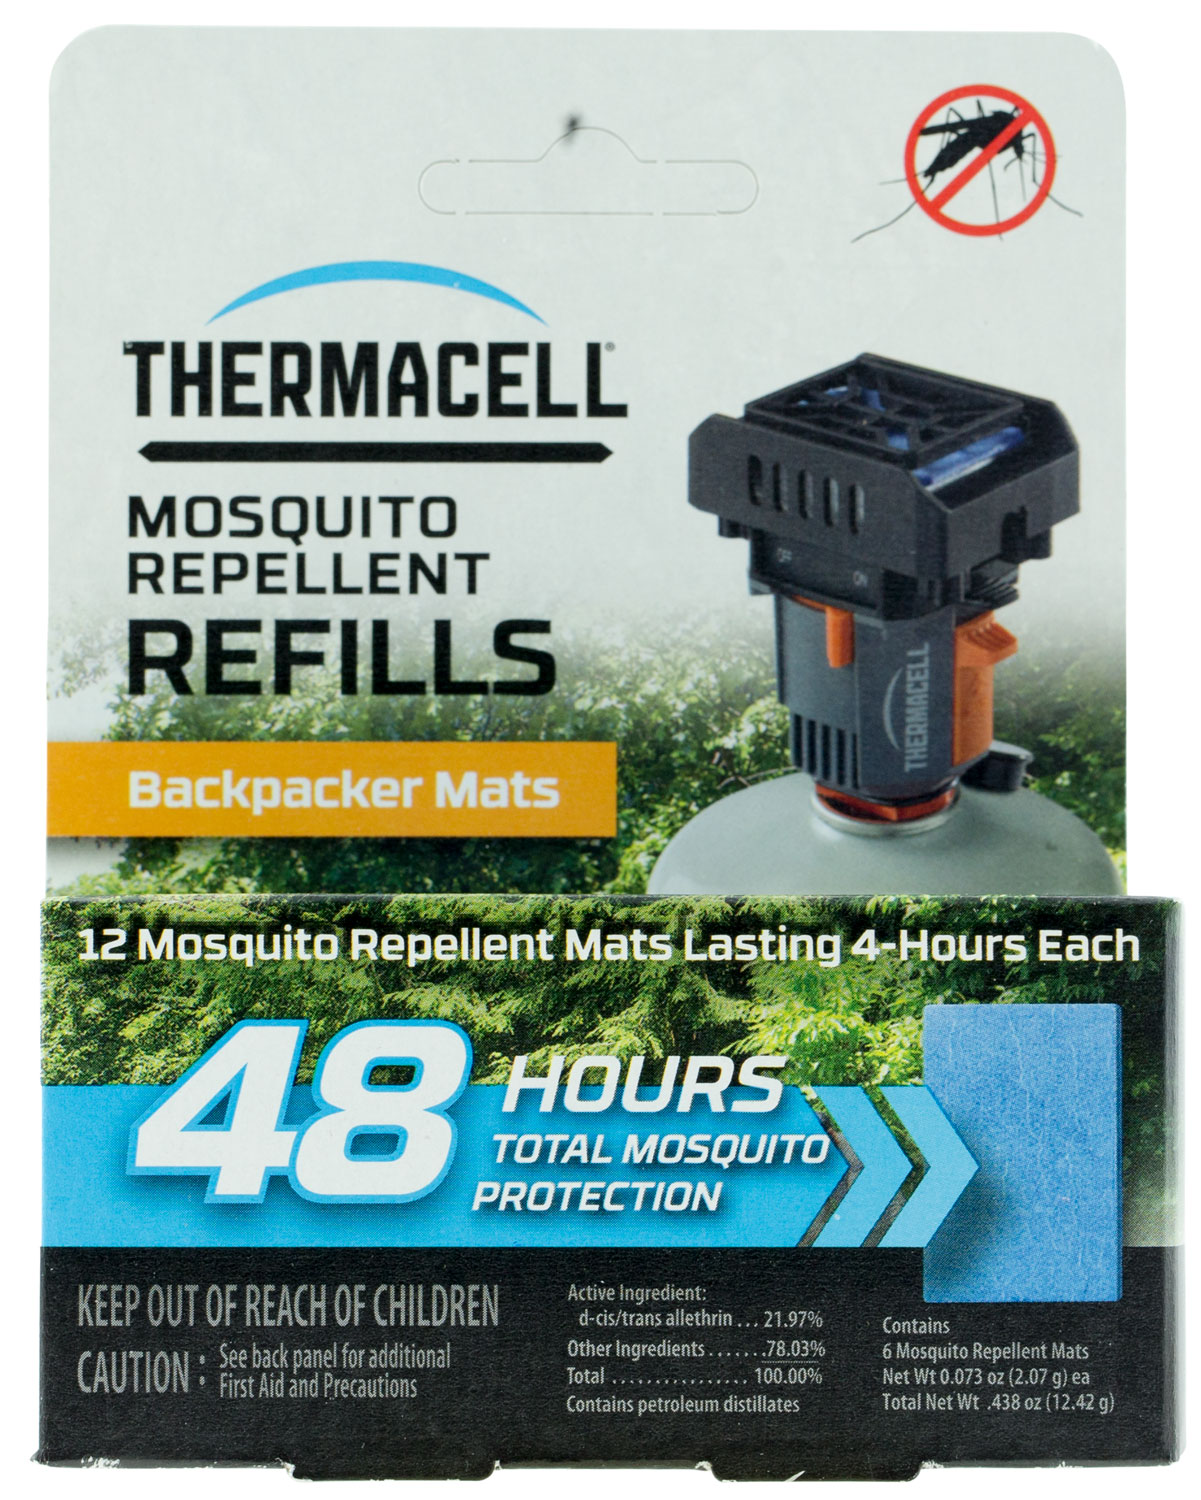 Thermacell M48 Backpacker Repellent Refills Effective 15 ft Odorless Scent Repels Mosquito Effective Up to 48 hrs 12 Mats